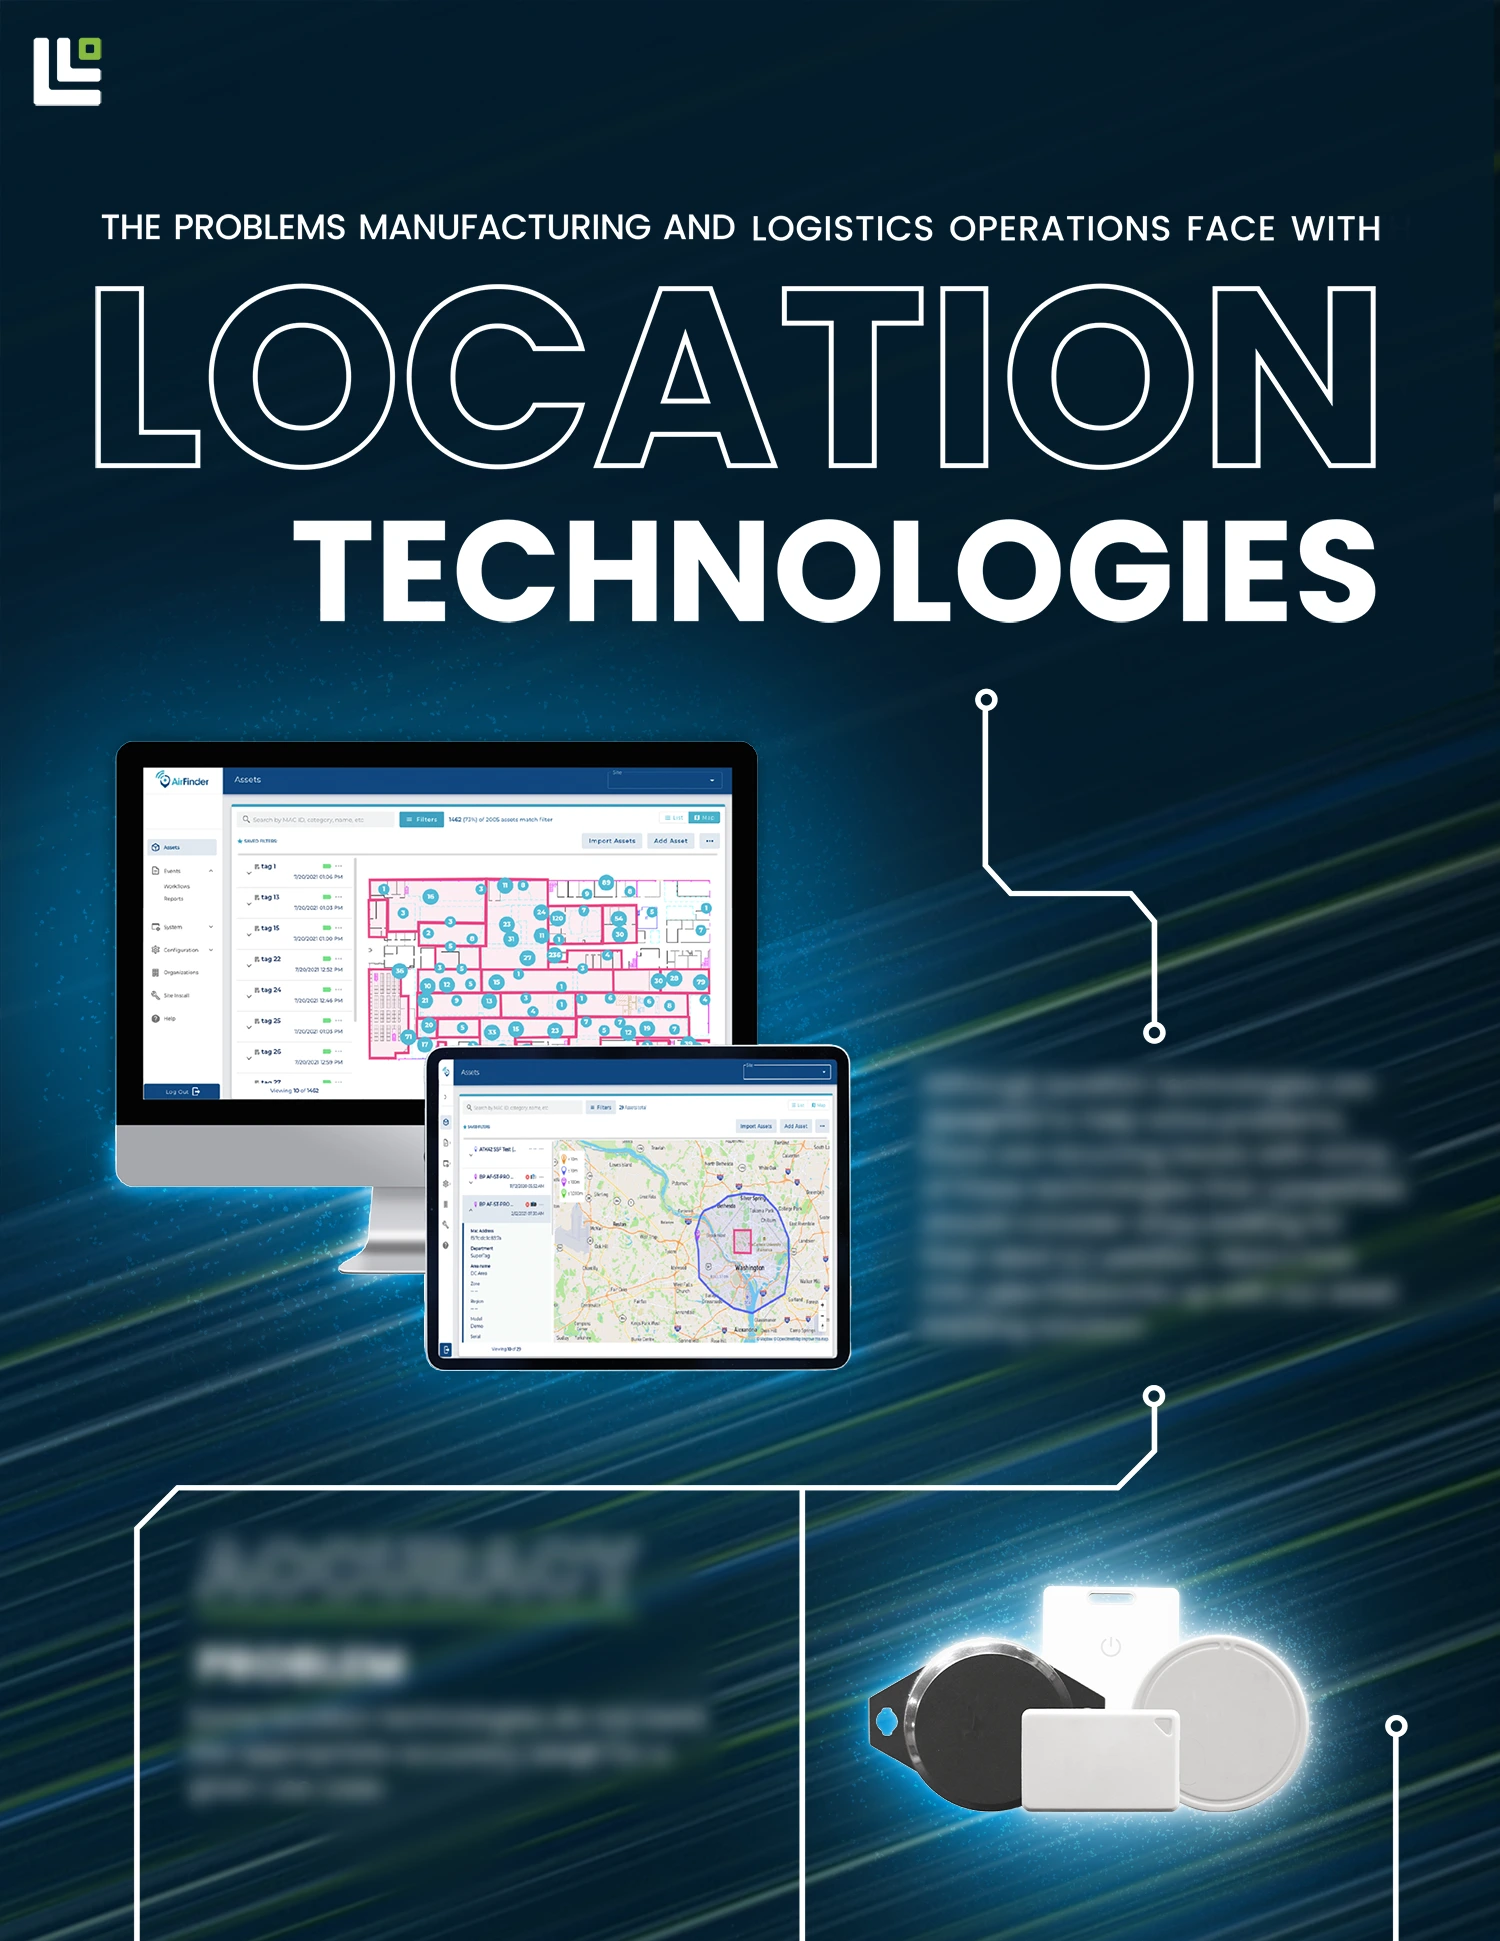 Problems companies face with location technologies